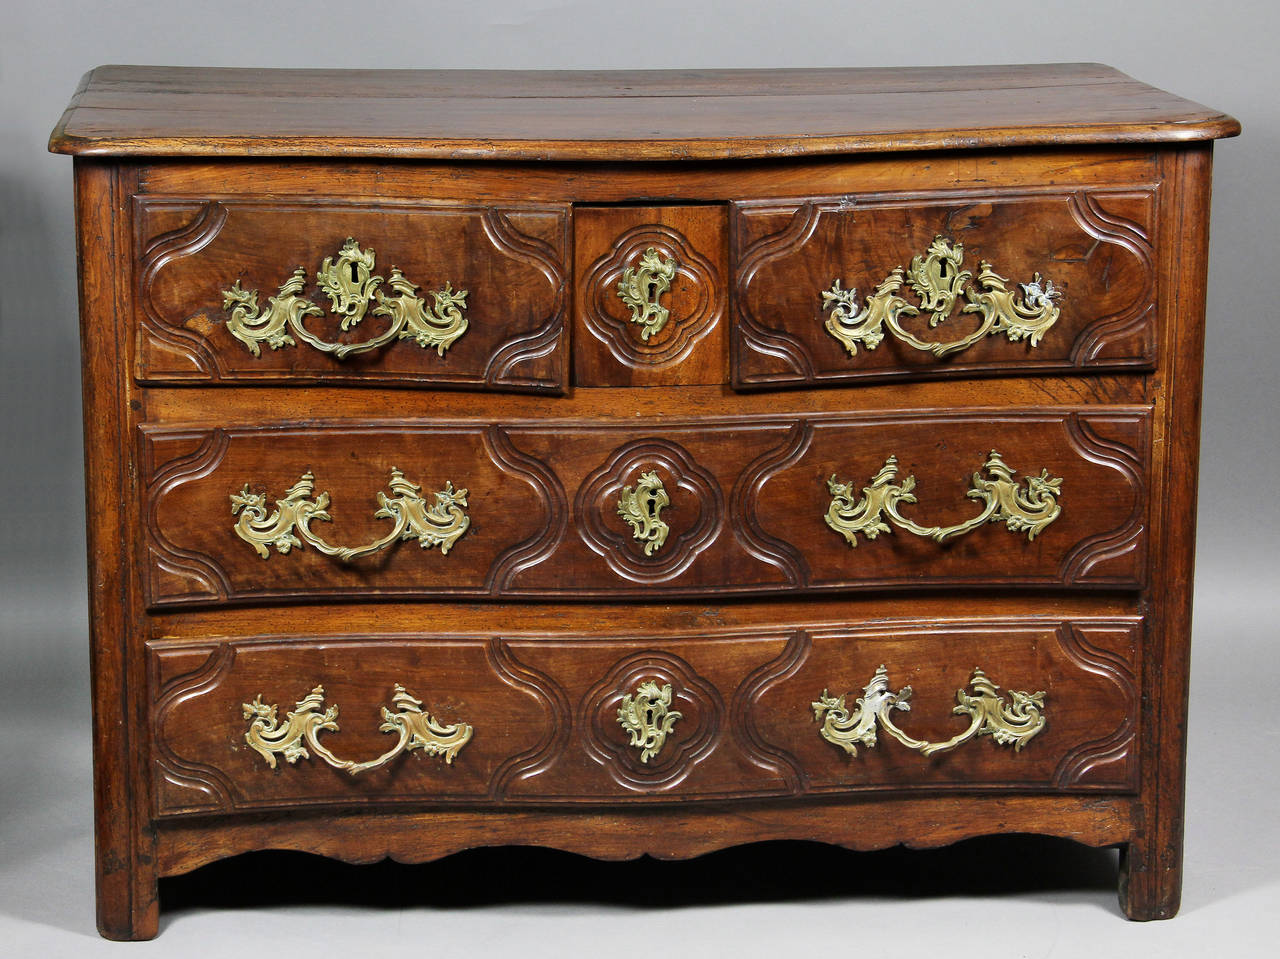 Serpentine top over a pair of drawers with central hidden drawer over two conforming drawers ,all with panelled fronts ,  panelled sides , shaped feet.